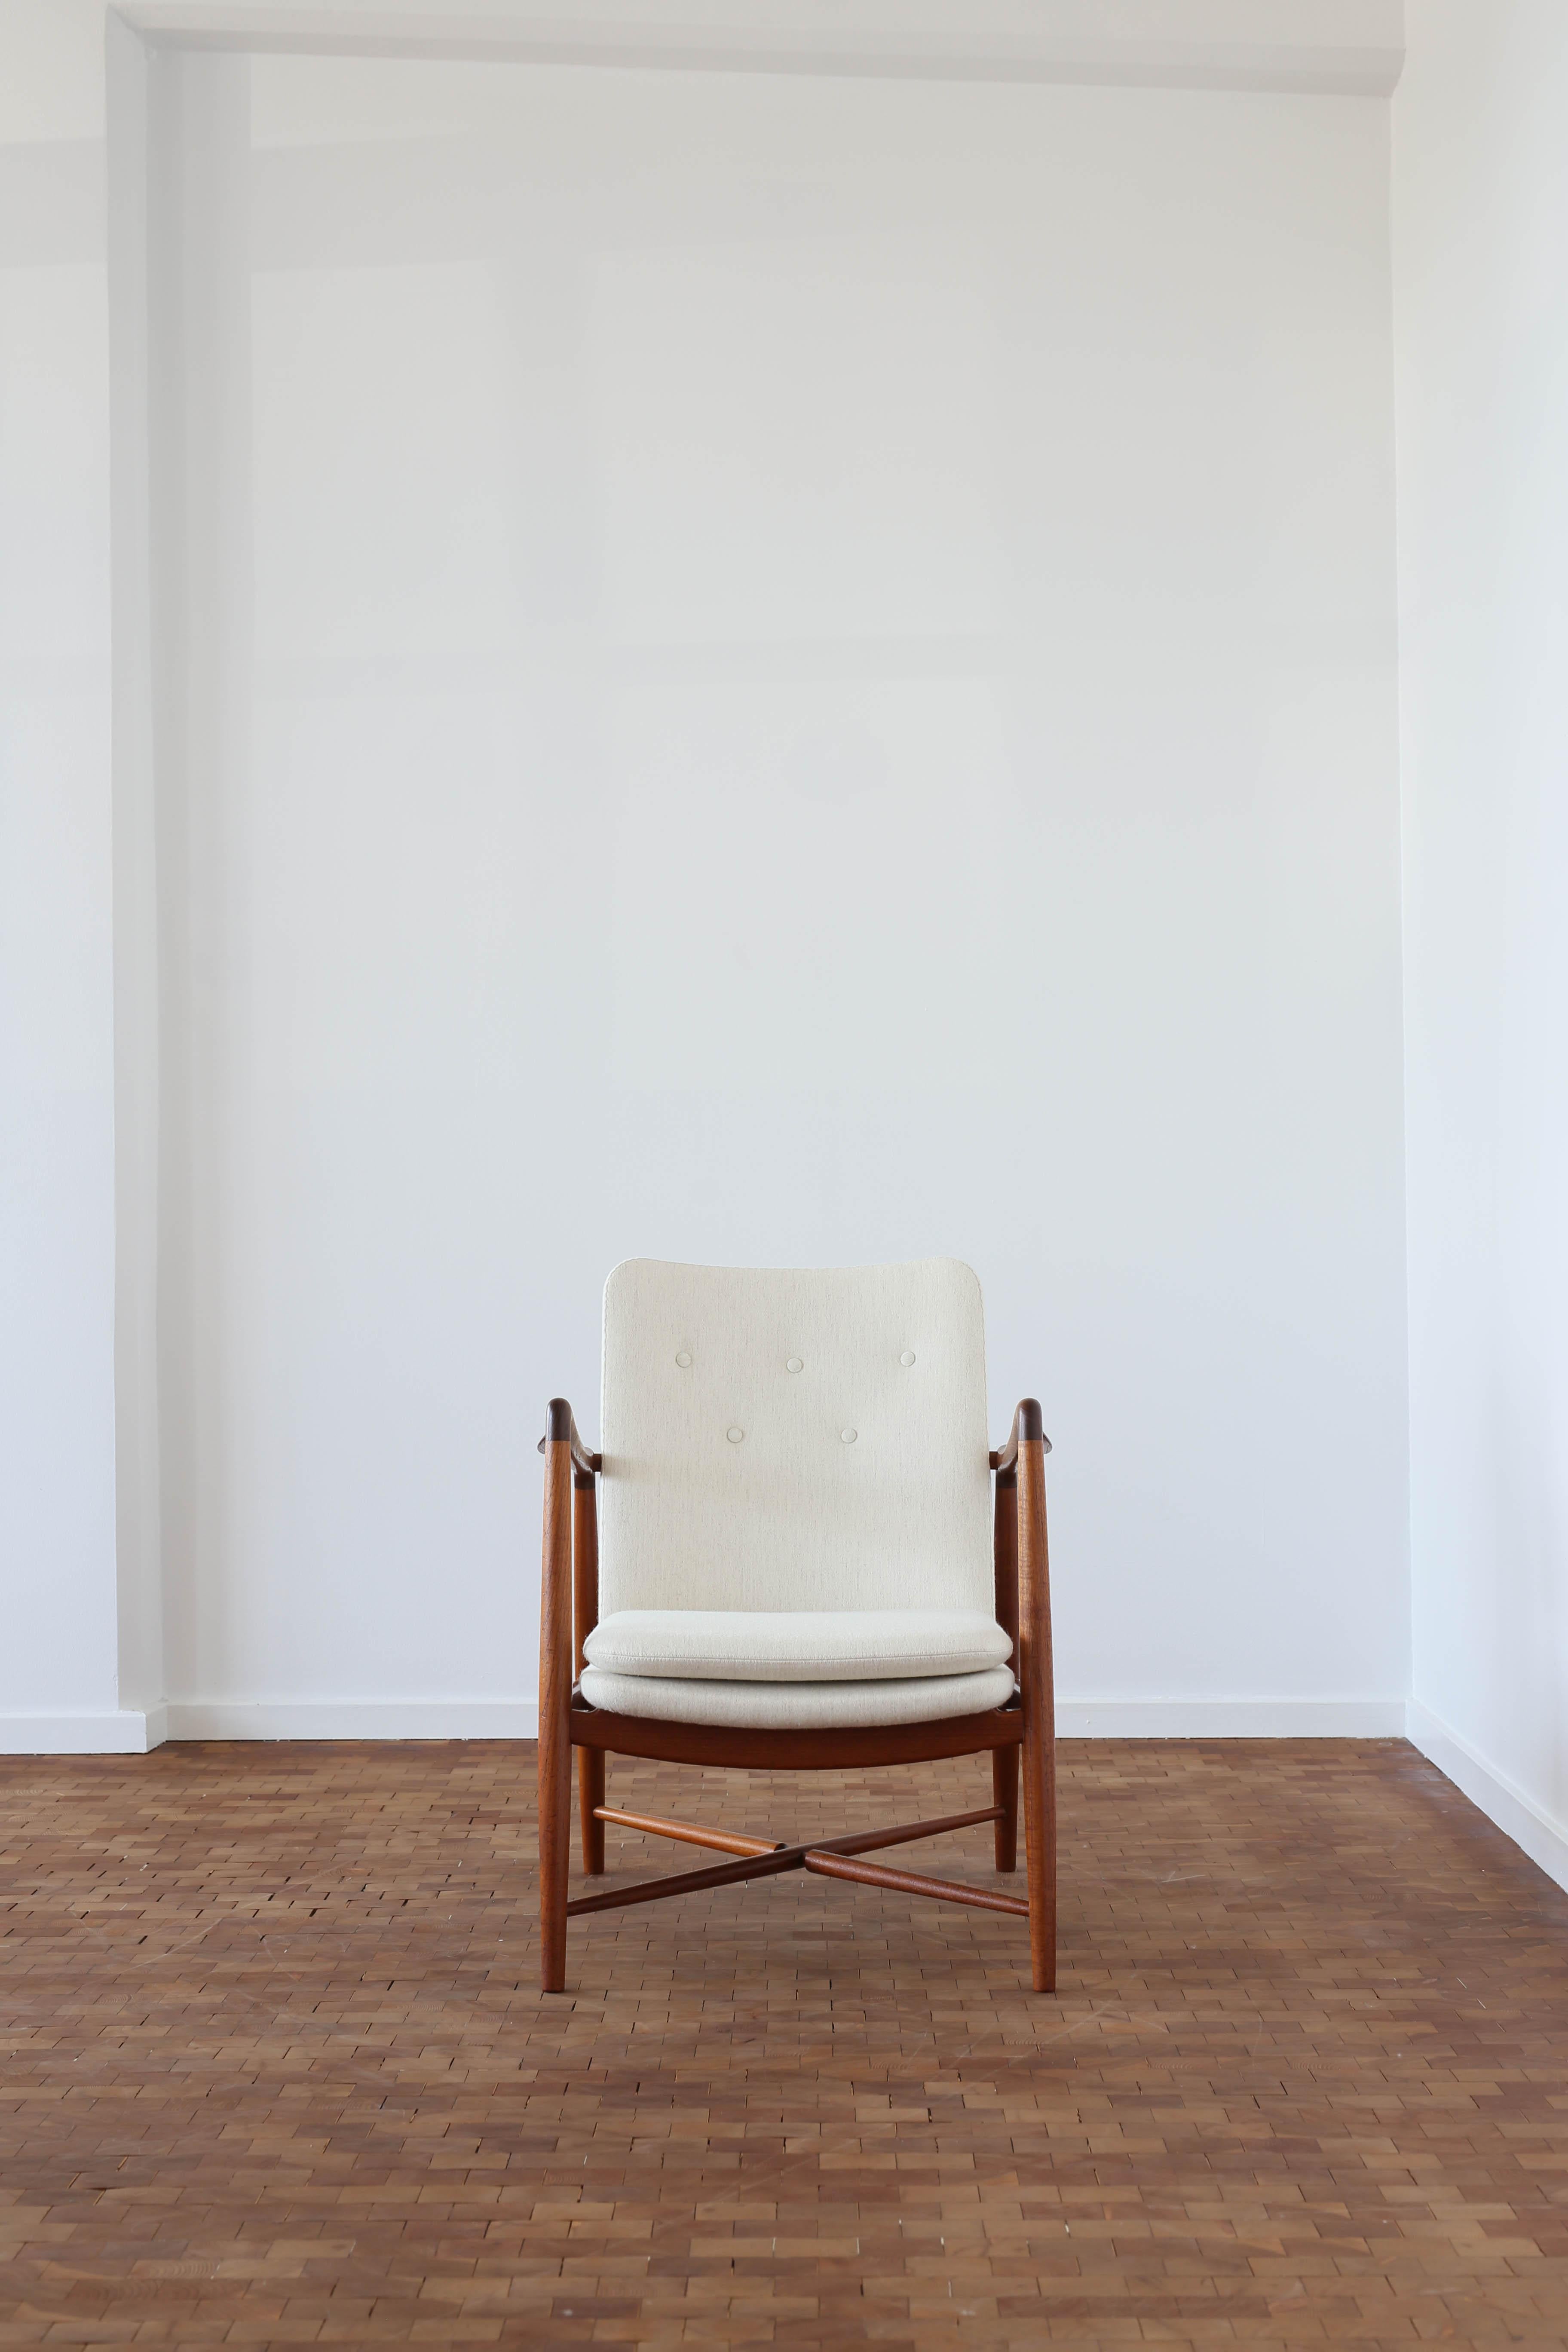 Finn Juhl 'Fireplace' chair designed 1946 and executed at cabinetmaker Bovirke, Denmark. 

Frame of teak, new upholstery in light fabric by Tove Kindt-Larsen. Very fine condition. 